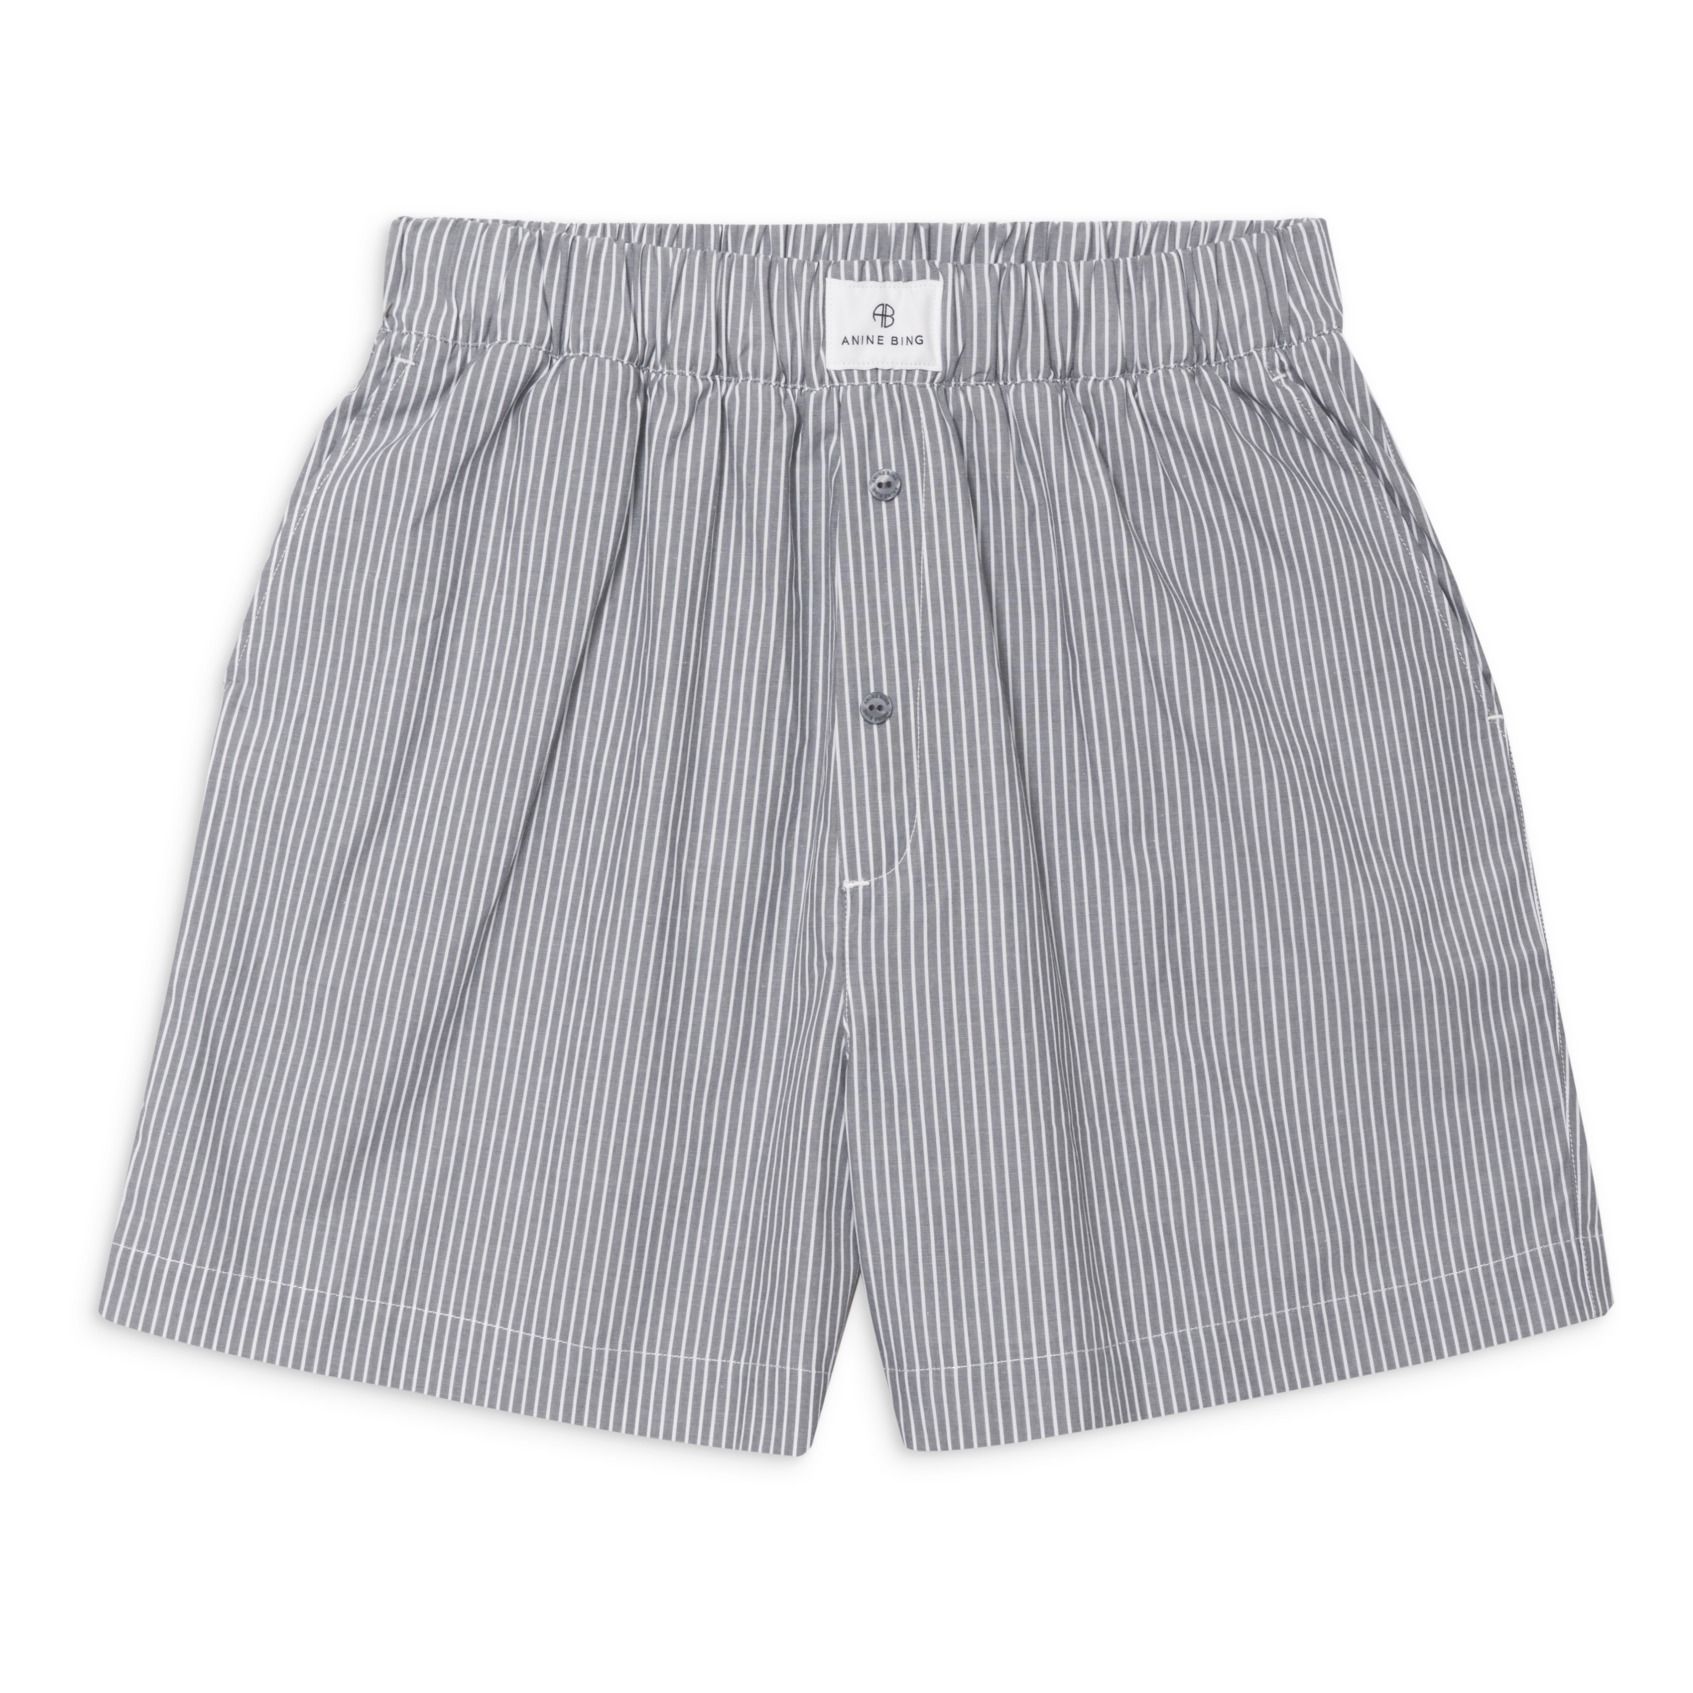 Anine Bing - Short Boxer Liam Rayures - Grey | Smallable